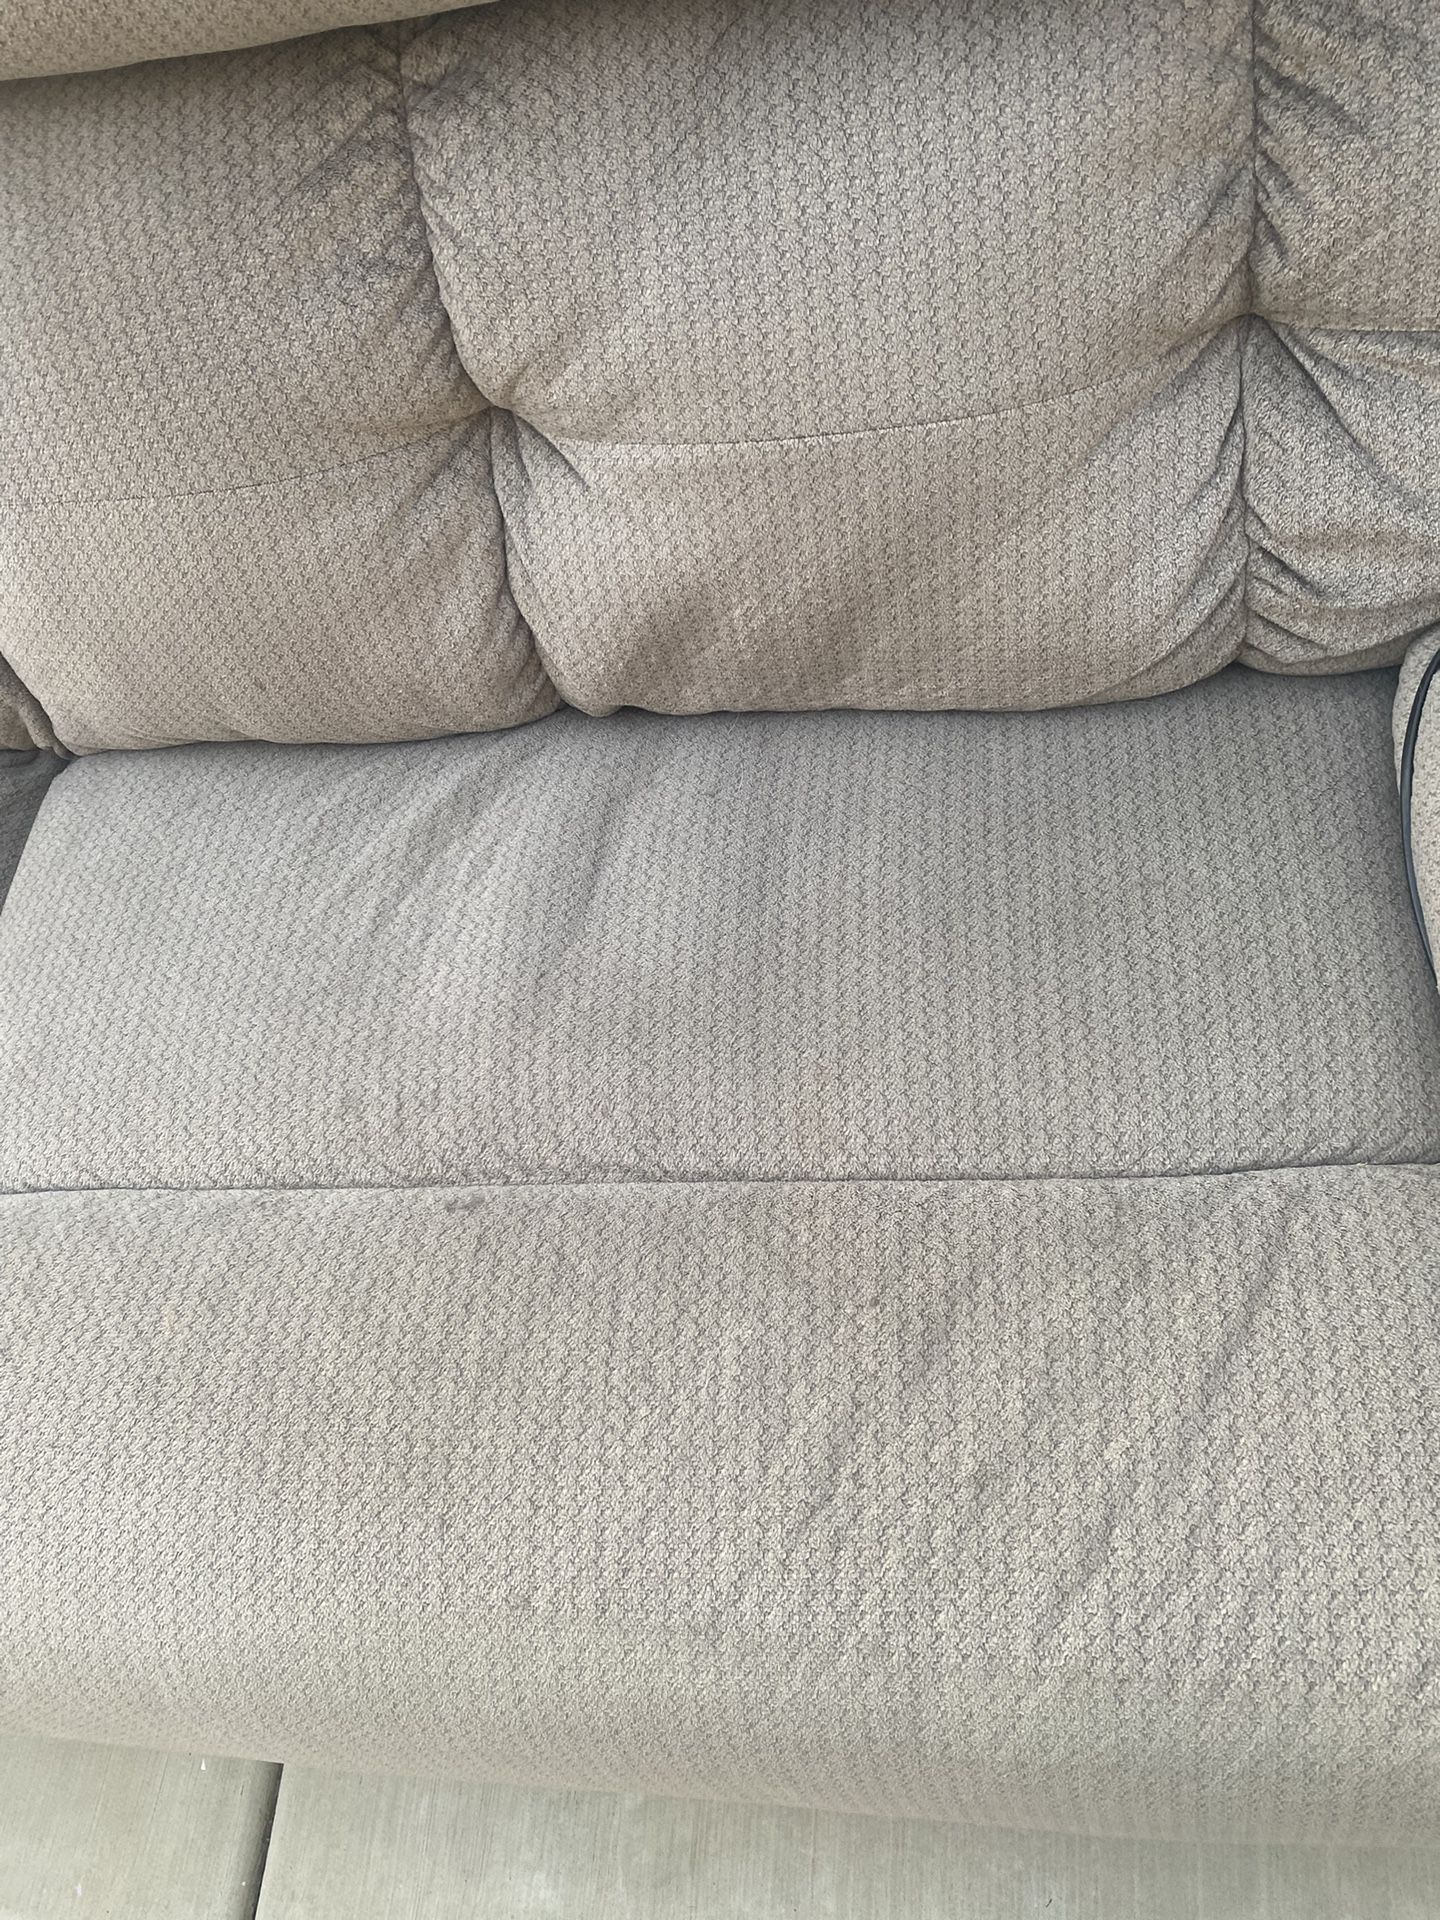 84 Inch Couch Recliners 